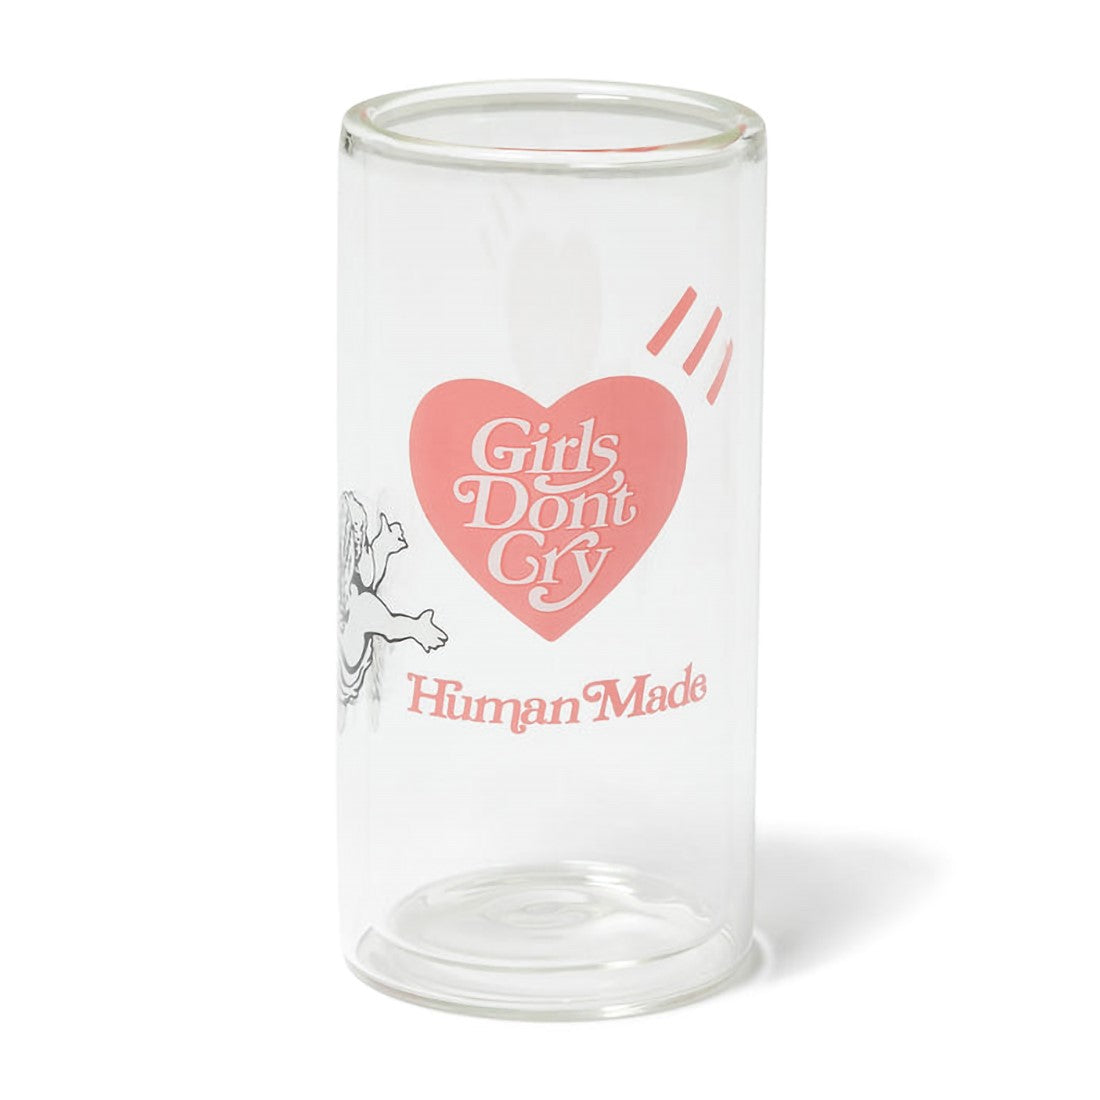 Girls Dont Cry x Human Made Valentine's Day Double Wall Glass